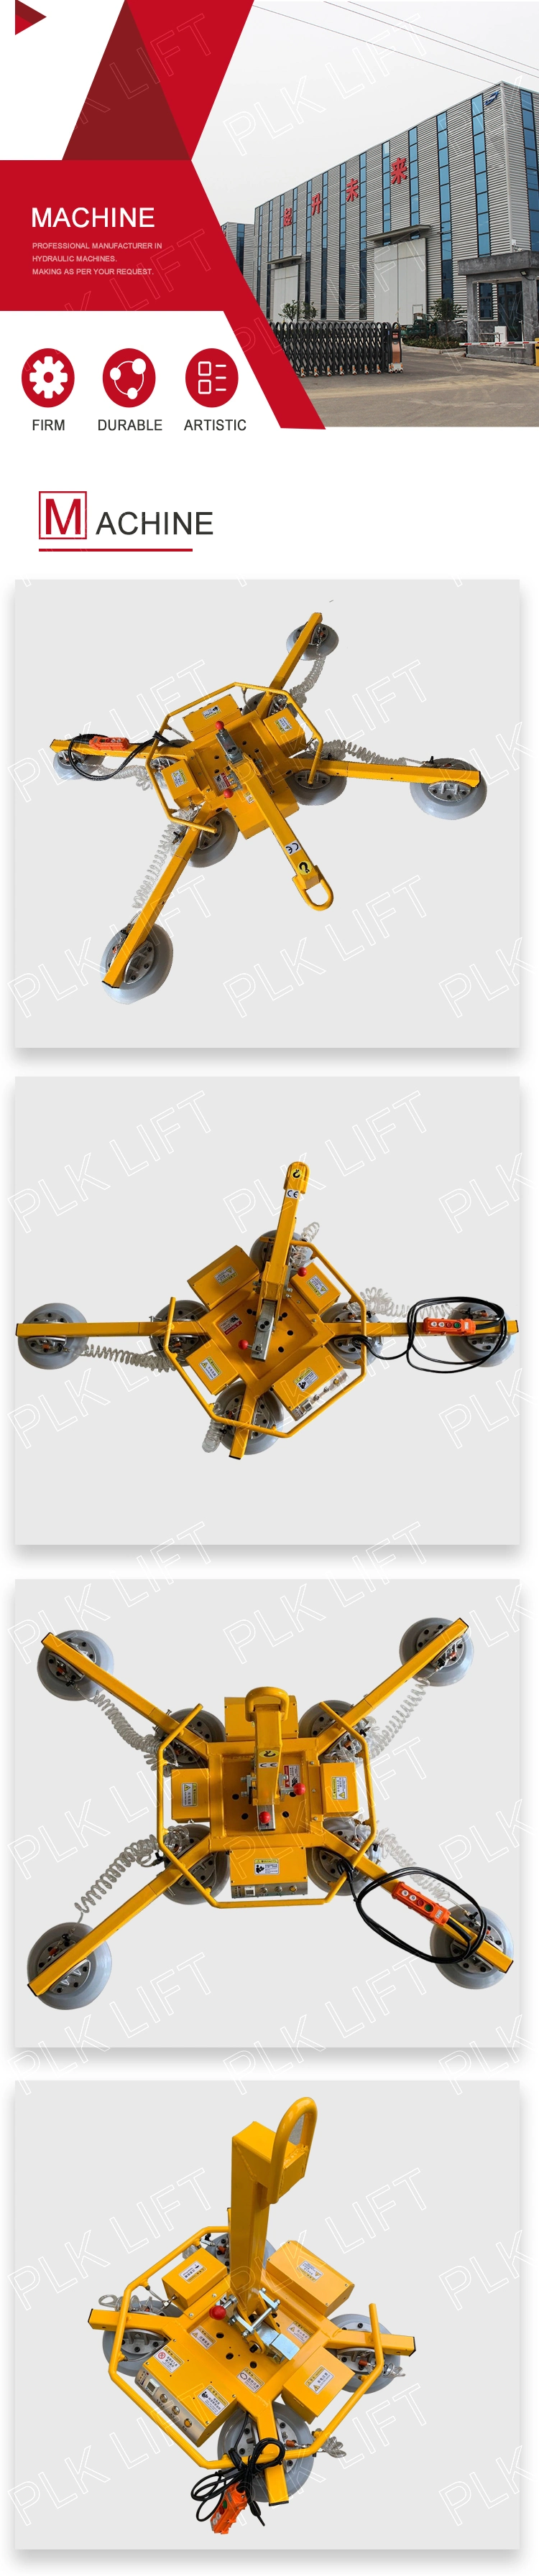 800kg Heavy Duty Sheet Suction Vacuum Lifter for Glass Installing